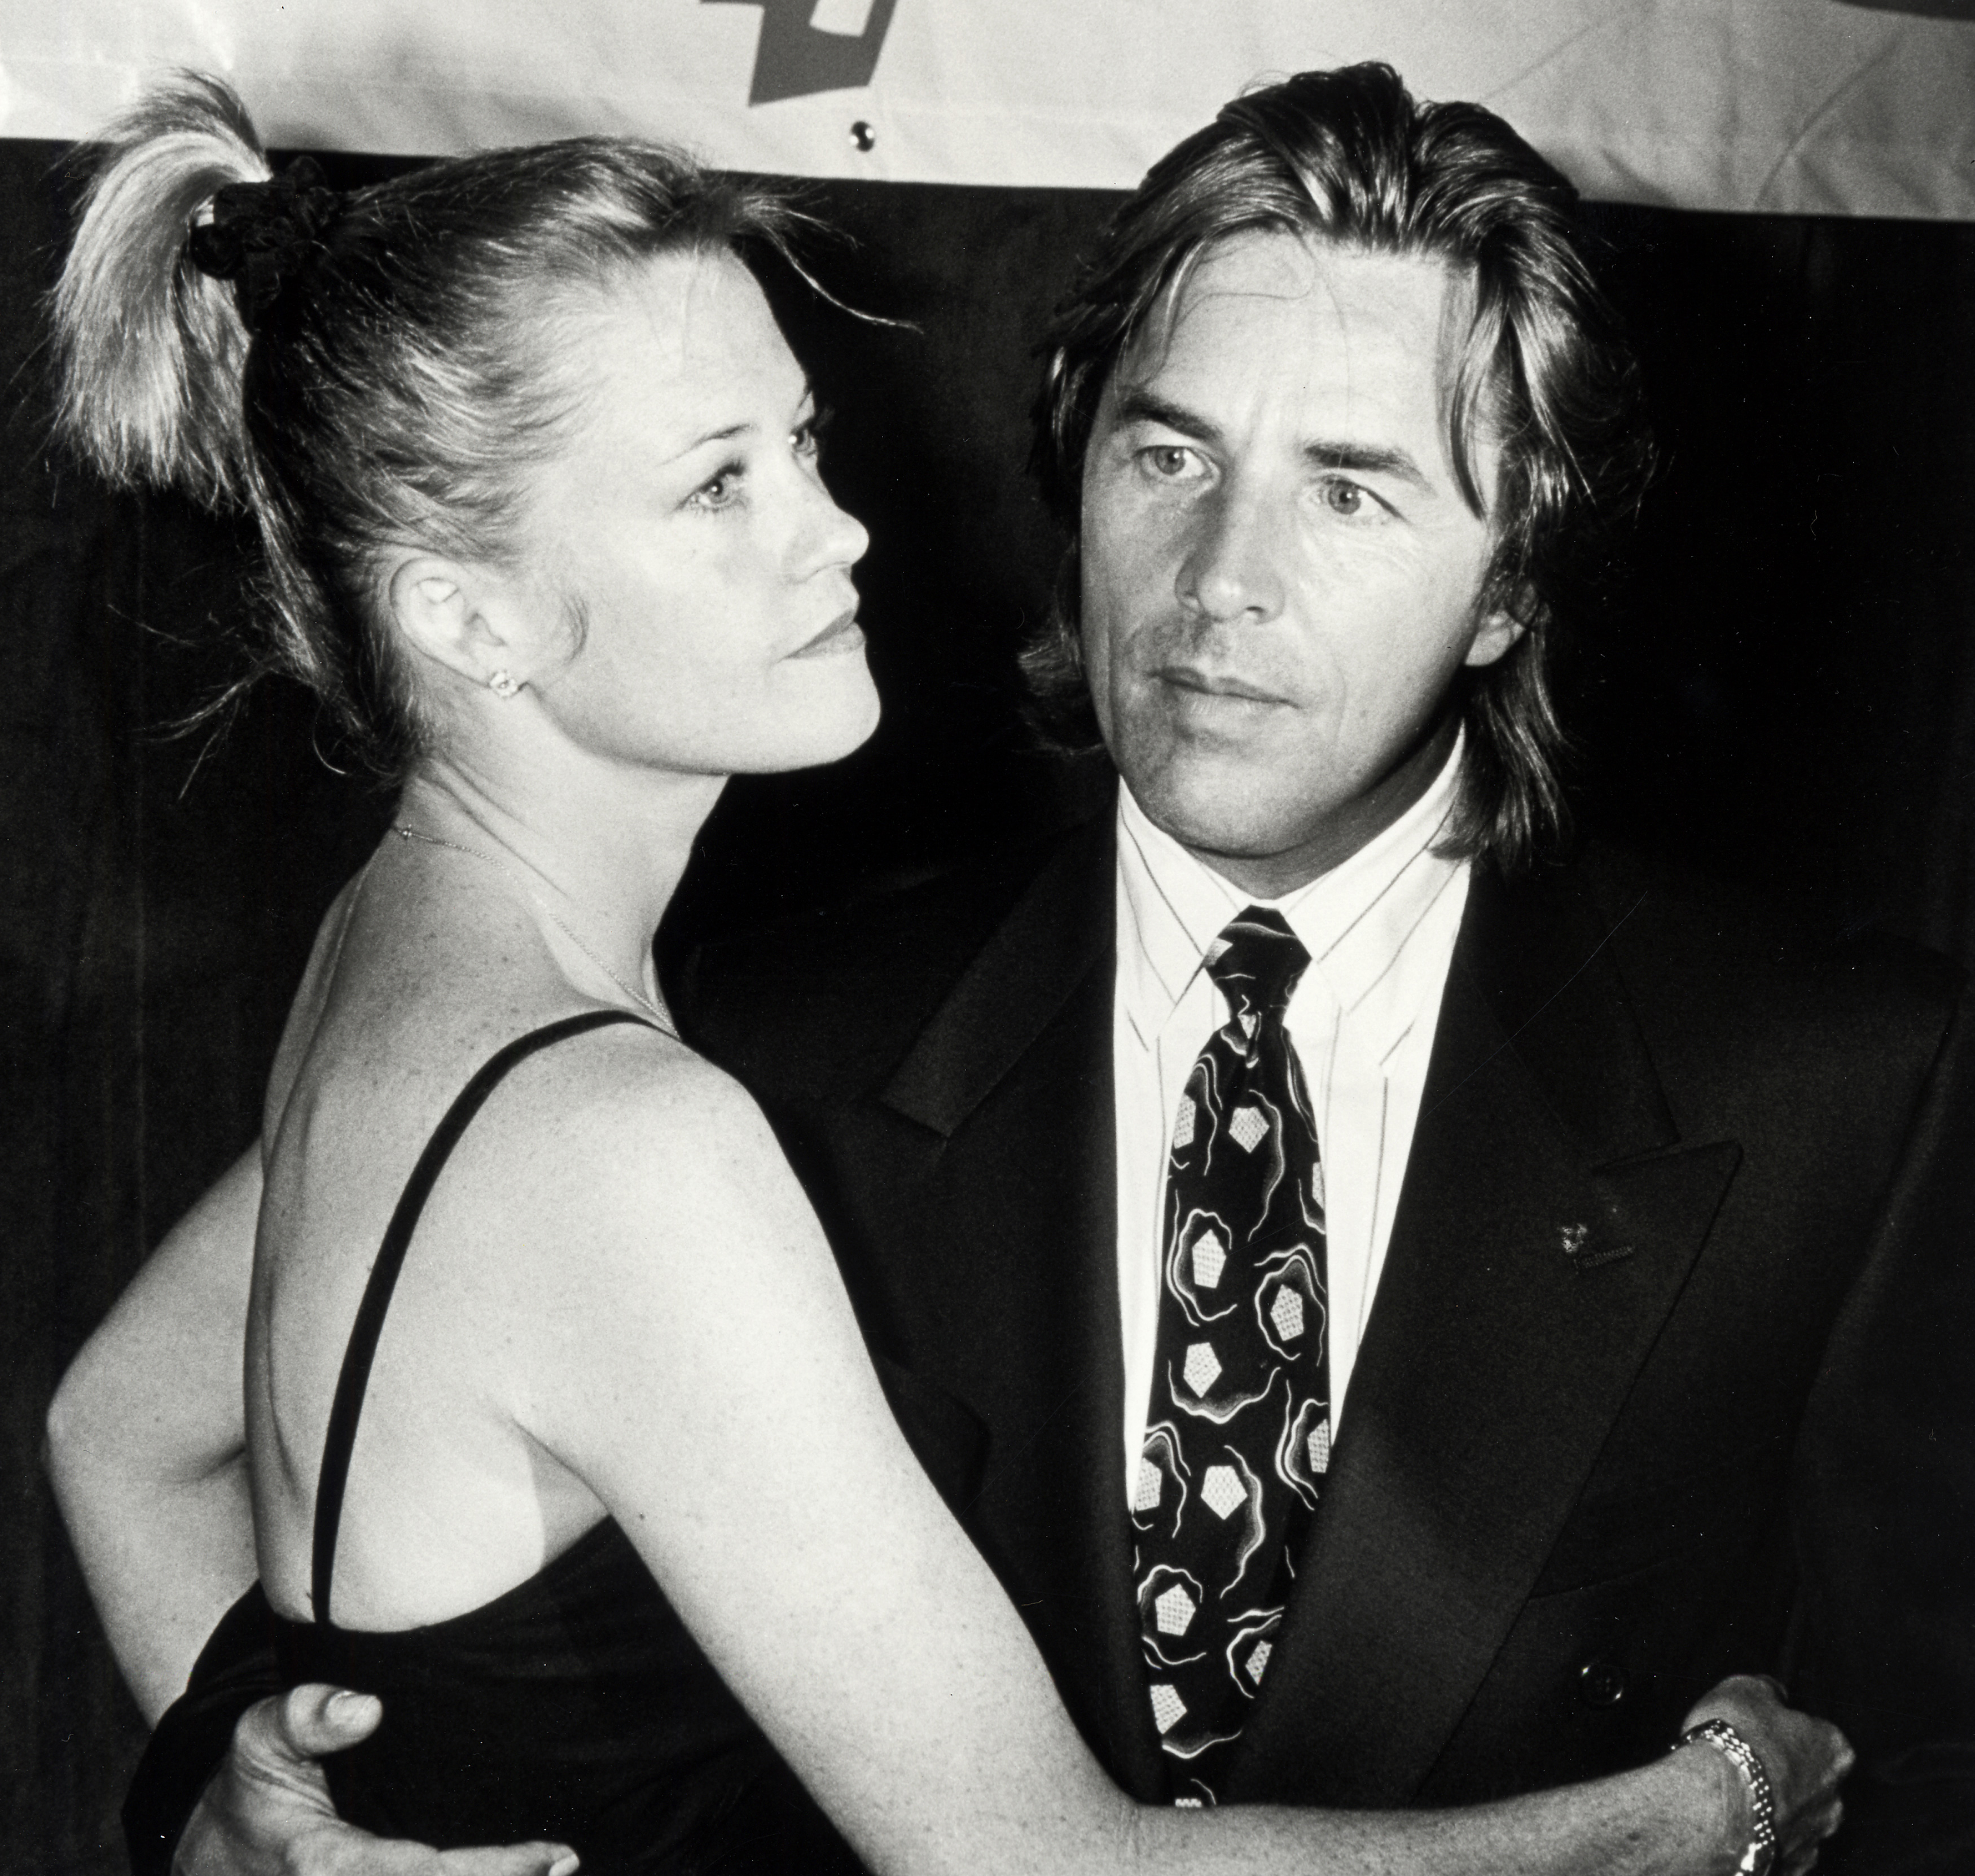 Melanie Griffith and Don Johnson at a reception benefitting Make-A-Wish Foundation on April 17, 1990. | Source: Getty Images